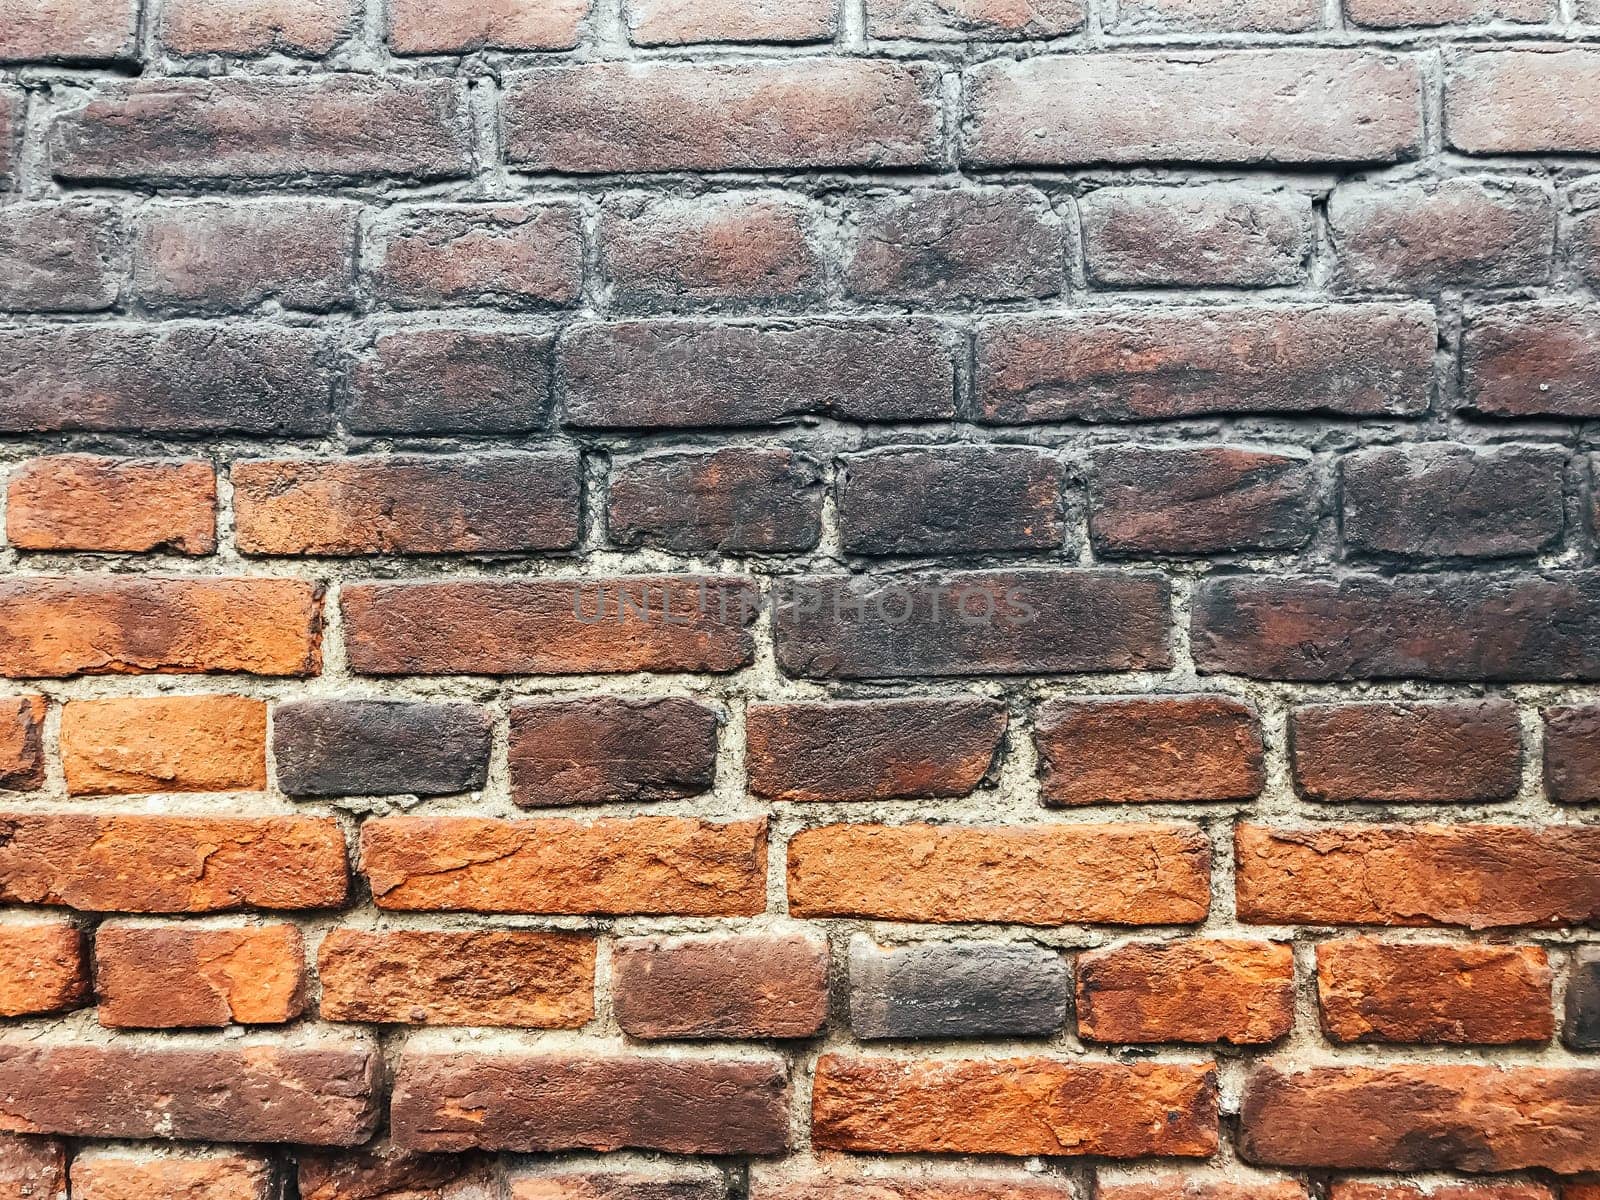 A brick wall with a brown and black color by Alla_Morozova93